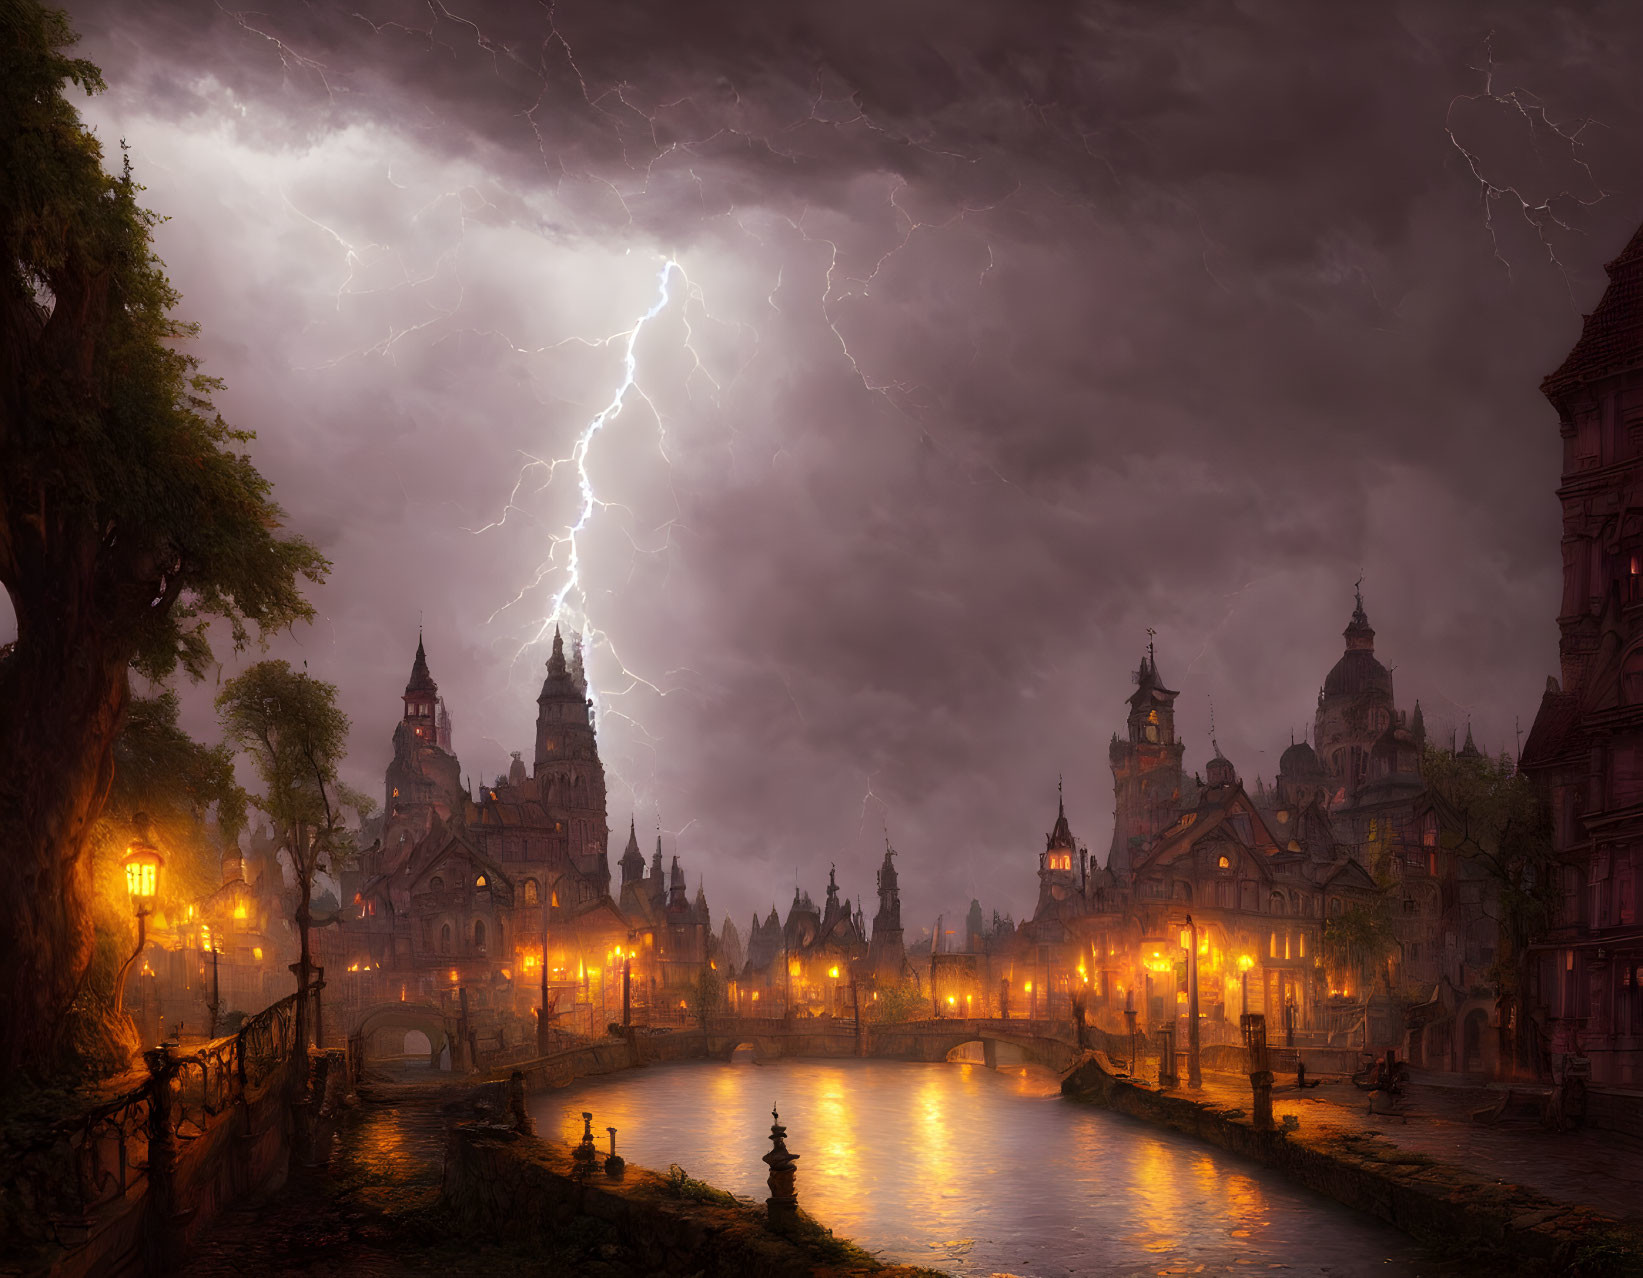 Lightning Storm in Old City 